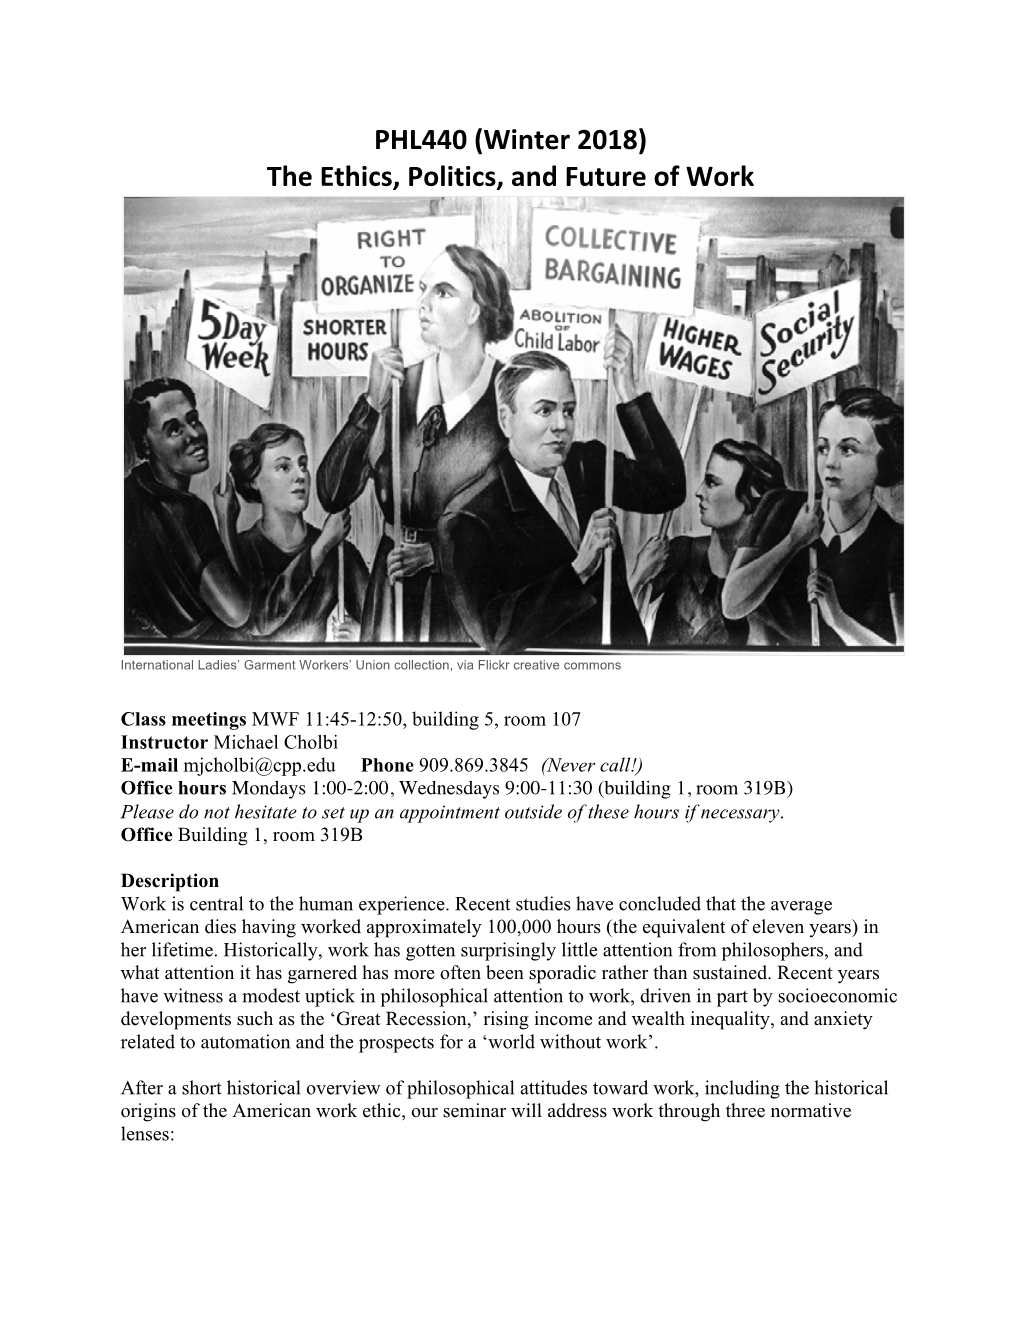 The Ethics, Politics, and Future of Work